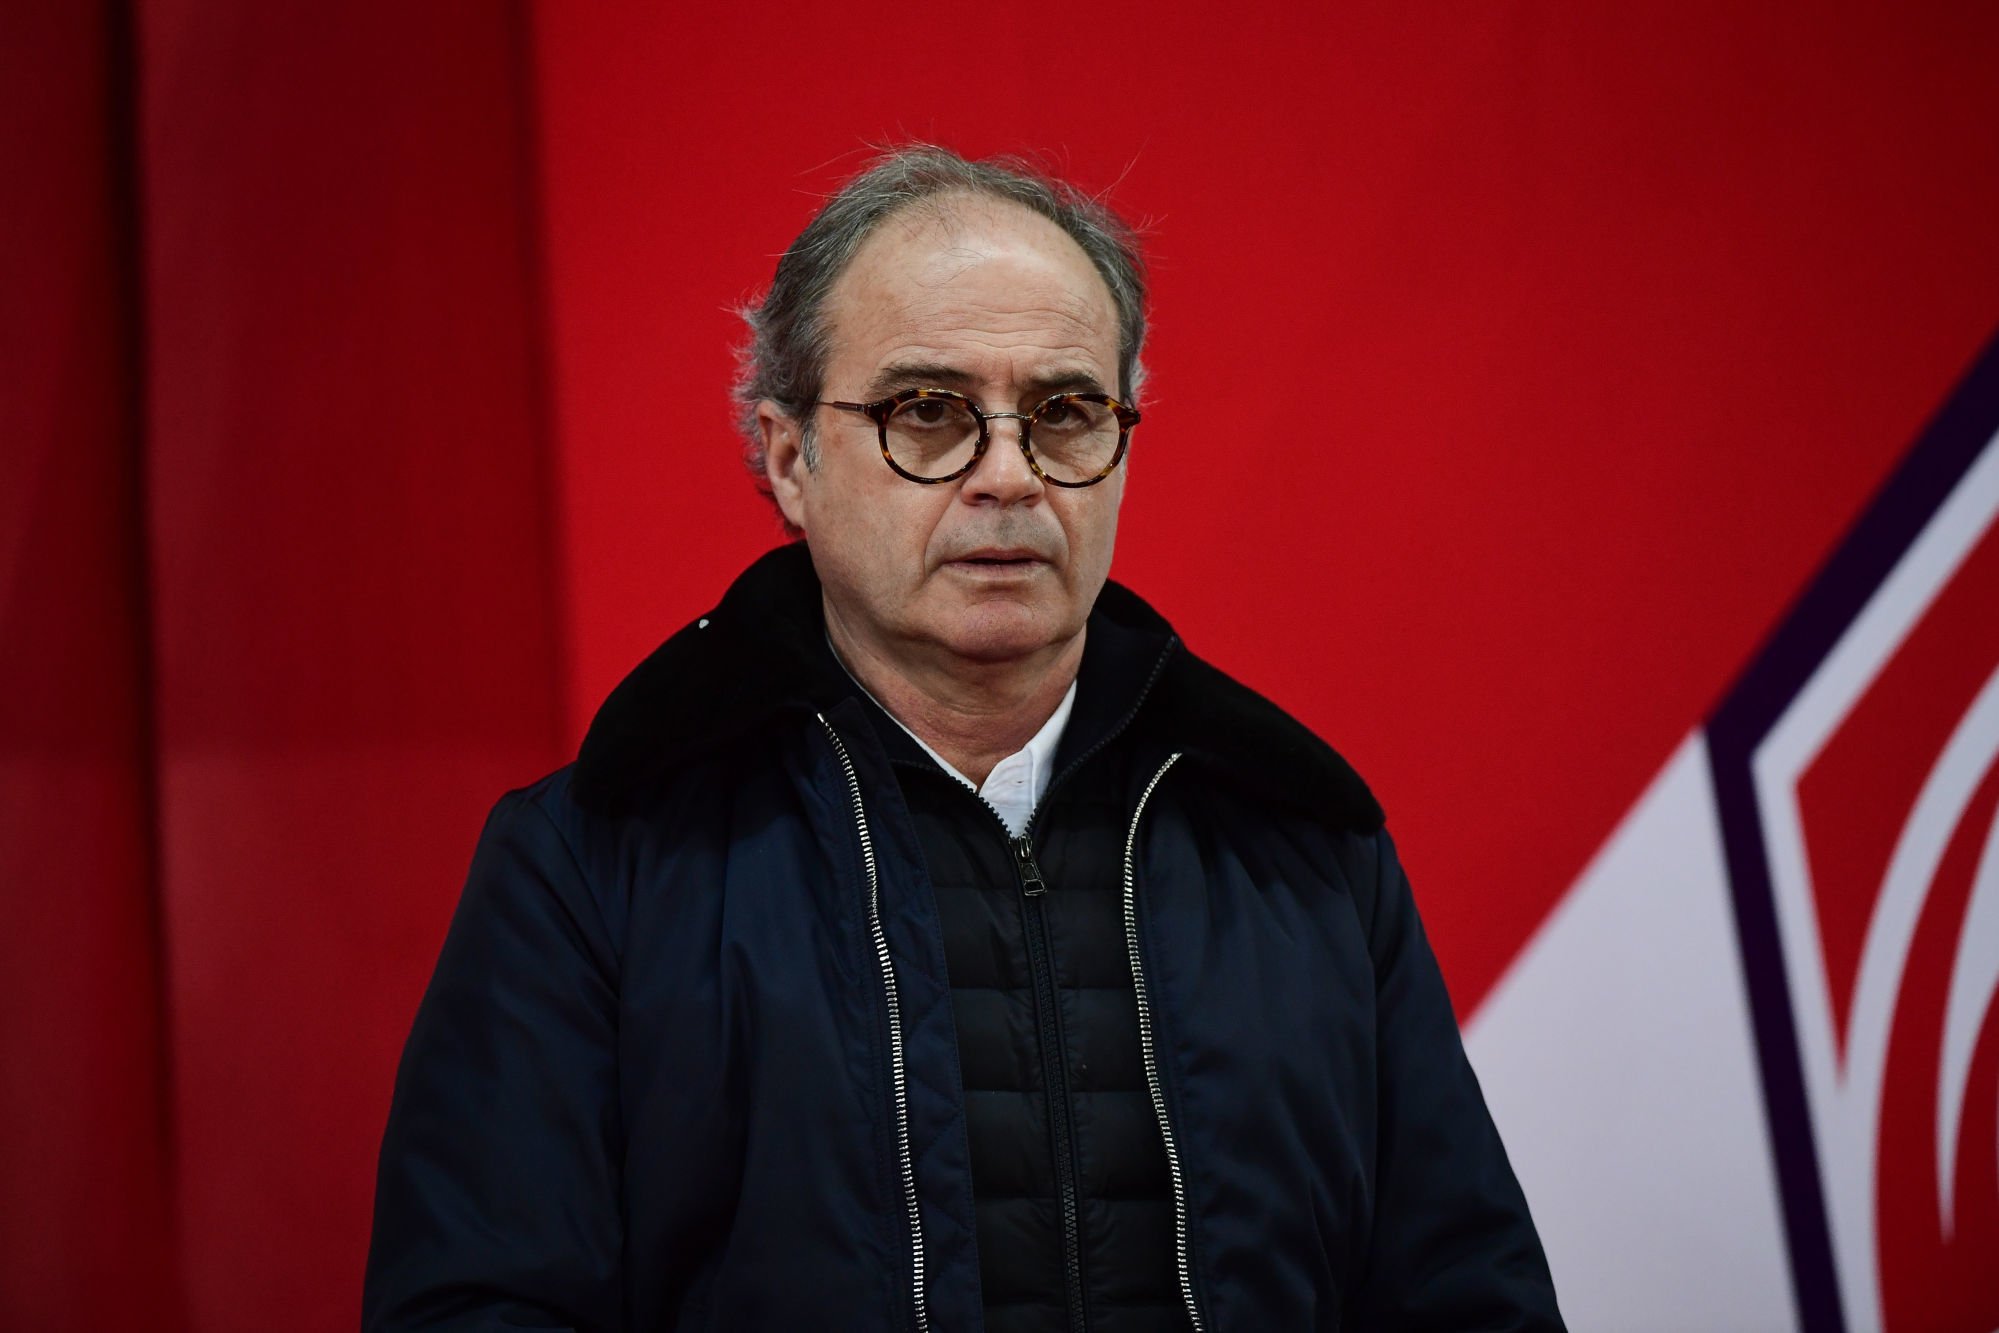 Lille sporting director Luis CAMPOS during the Ligue 1 match between Lille and Paris at Stade Pierre Mauroy on January 26, 2020 in Lille, France. (Photo by Dave Winter/Icon Sport) - Luis CAMPOS - Mouscron (Belgique)